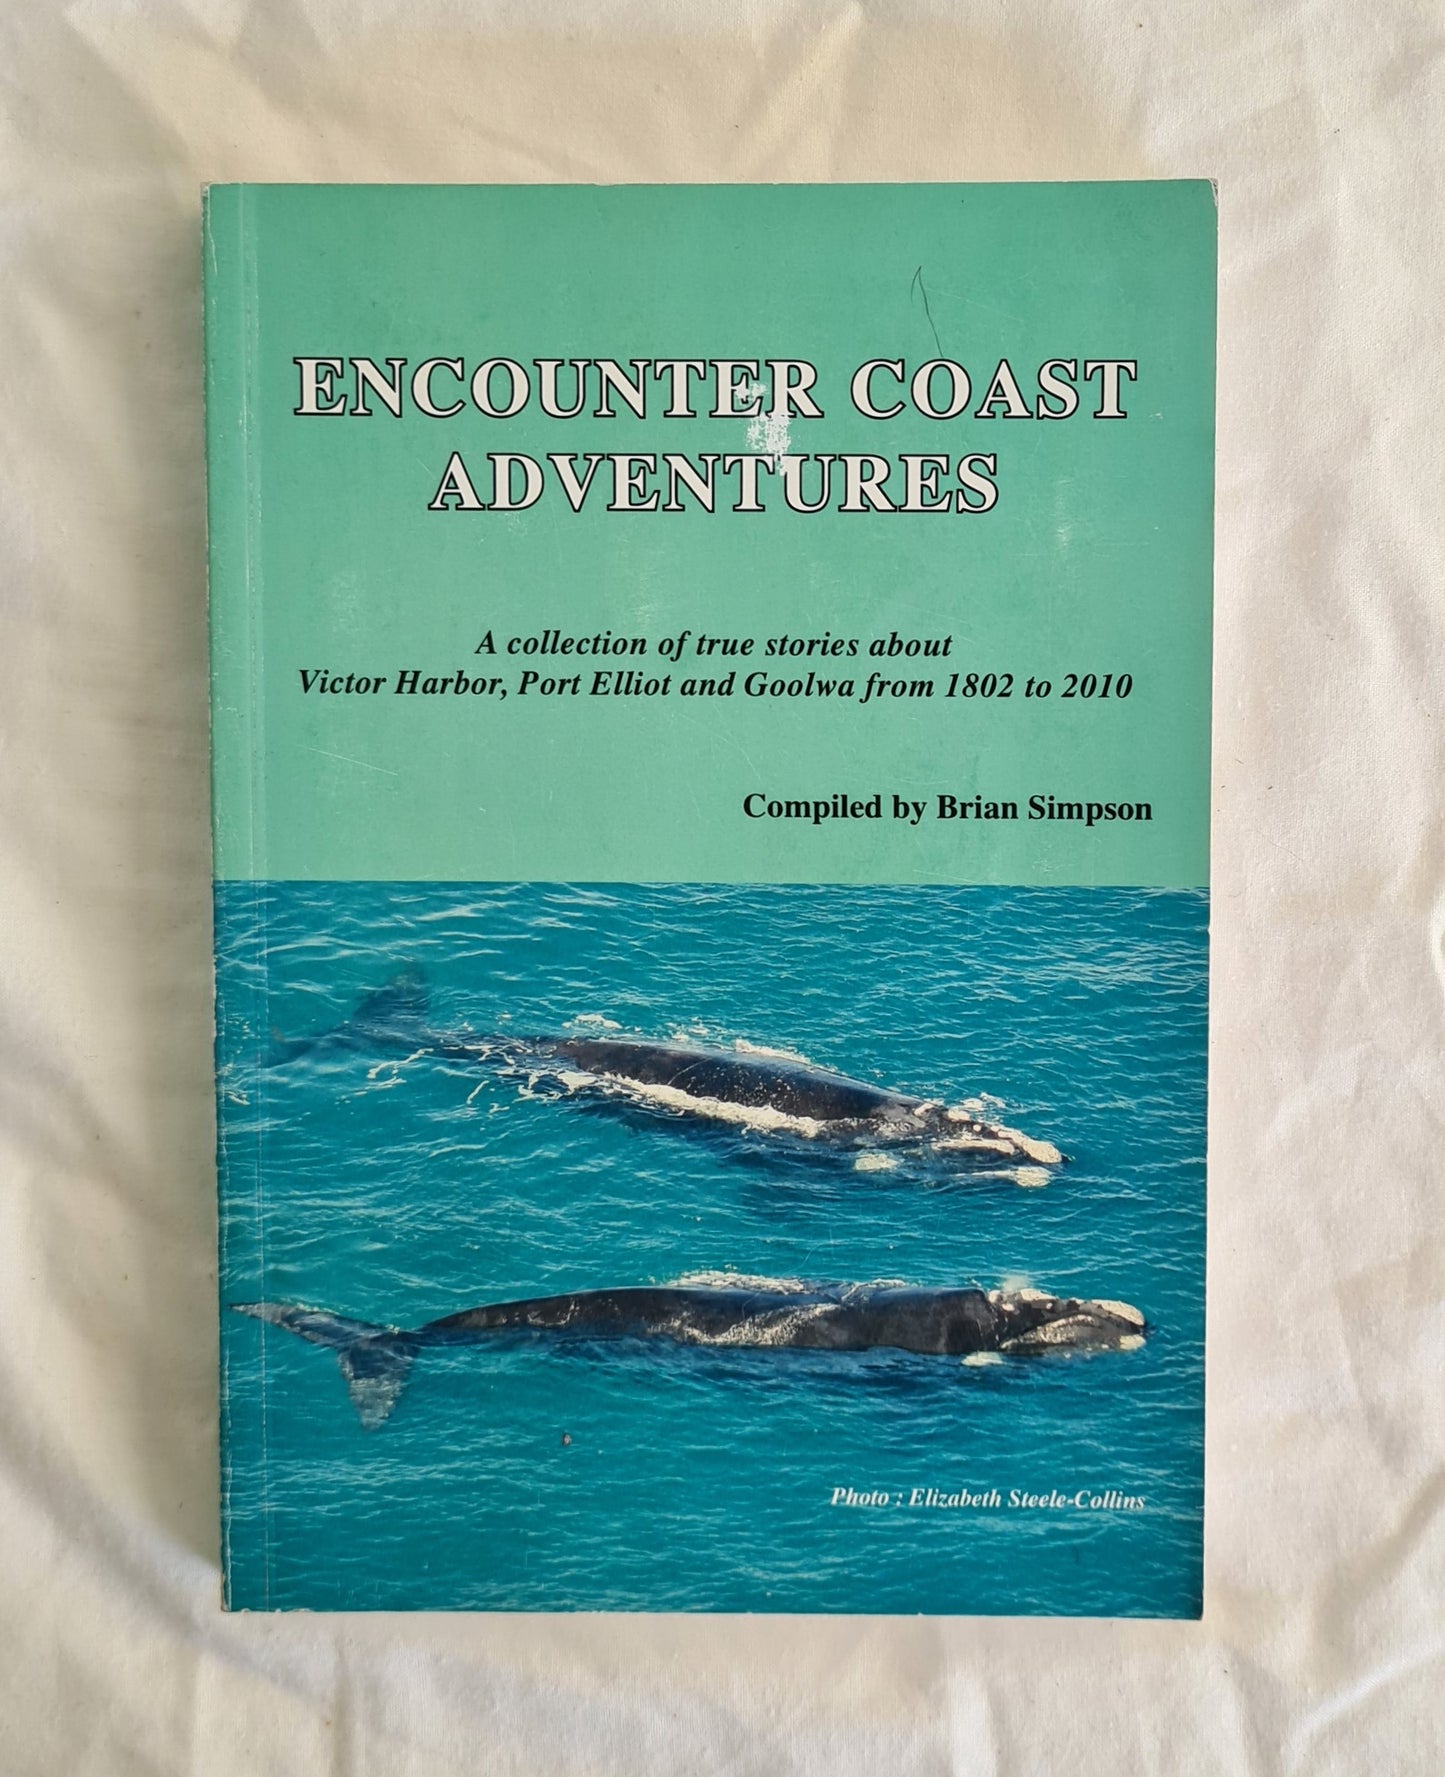 Encounter Coast Adventures  A collection of true stories about Victor Harbor, Port Elliot and Goolwa from 1802 to 2010  Compiled by Brian Simpson